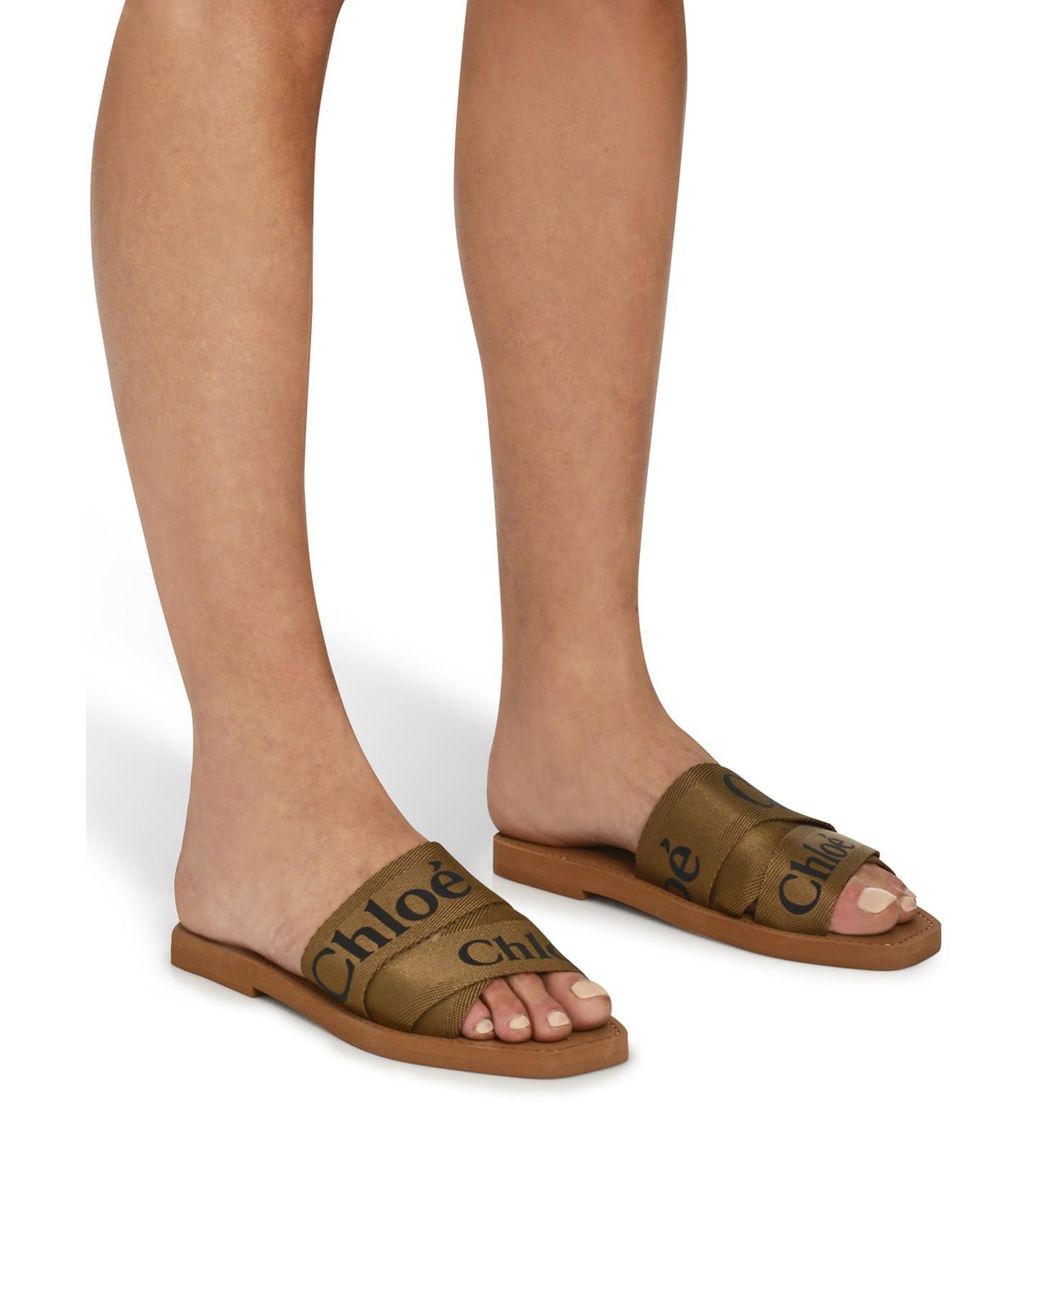 Chloé Leather Woody Sandals in Brown | Lyst Australia